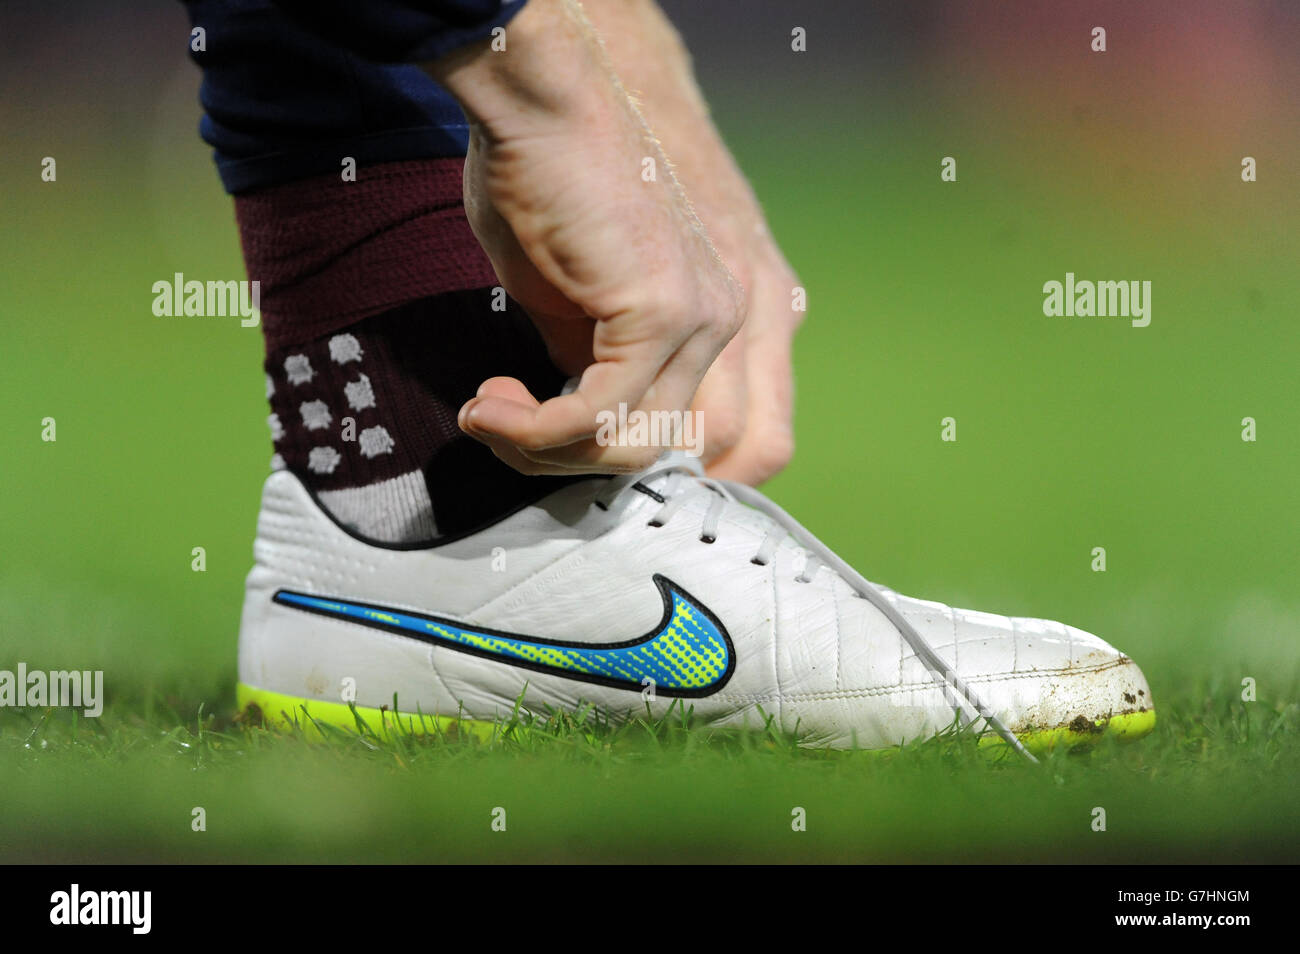 posture shark security Detail of a West Ham United player wearing white Nike football boots Stock  Photo - Alamy